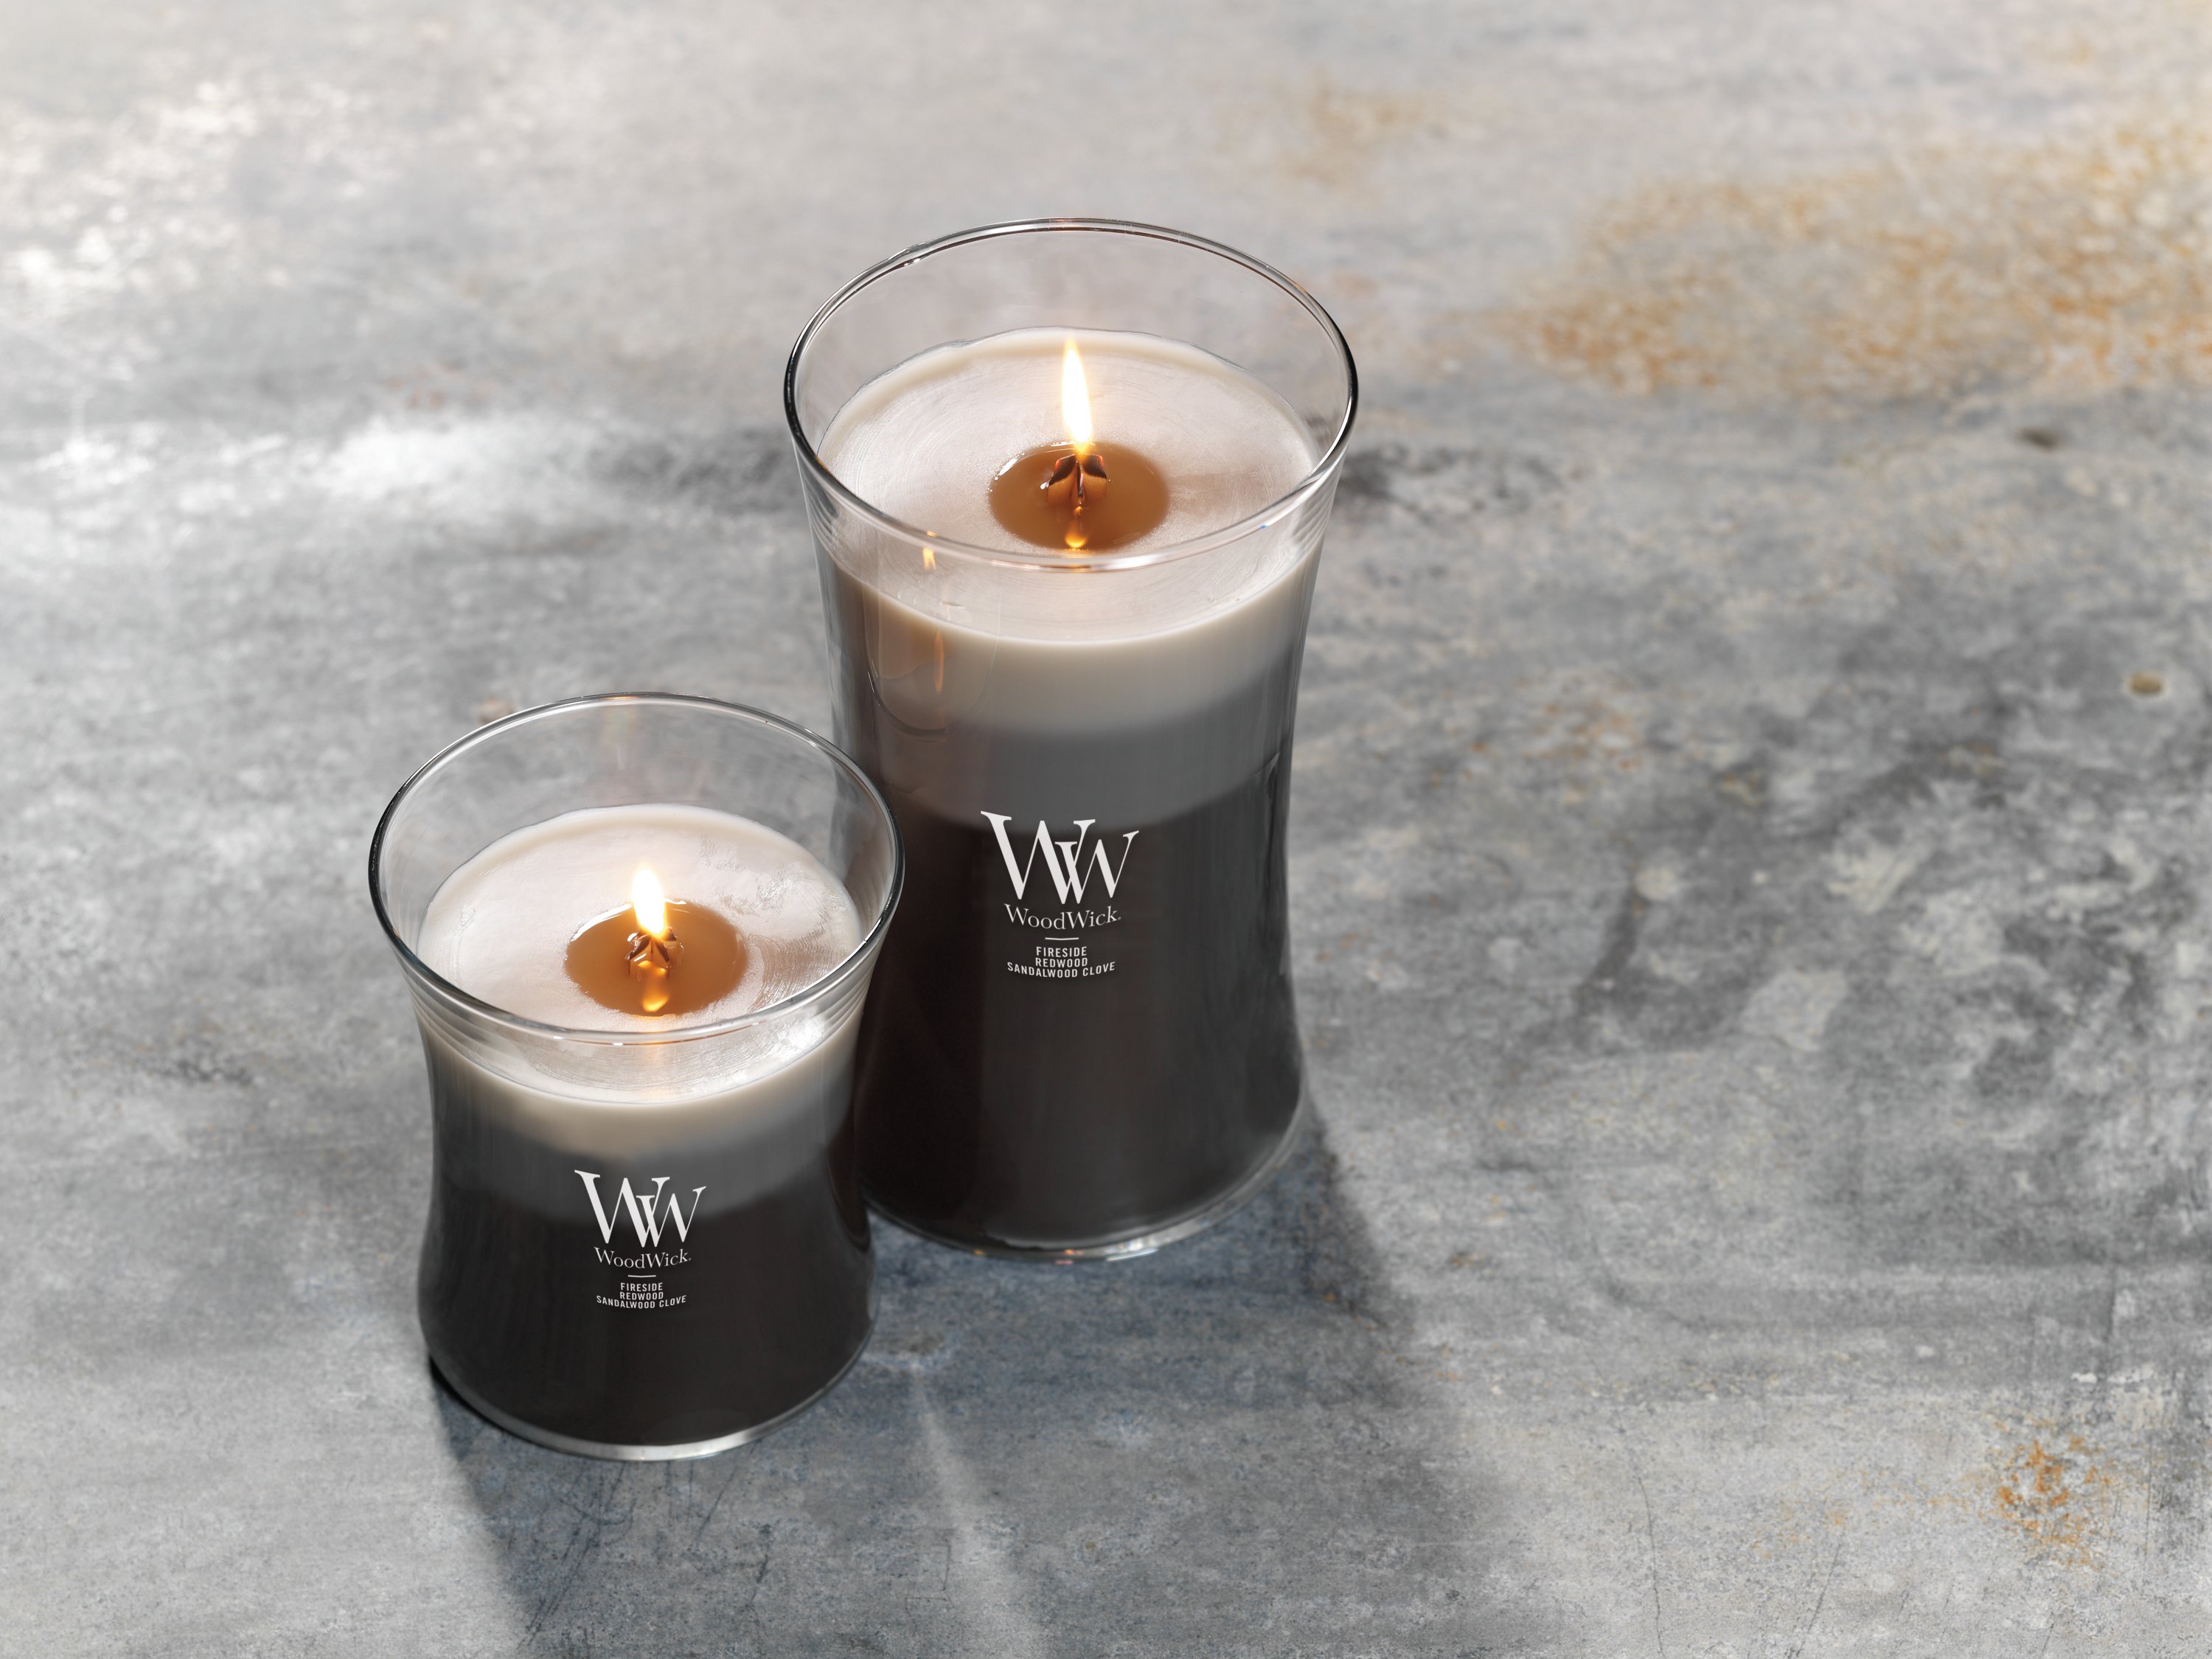 Warm Woods Trilogy WoodWick® Large Hourglass Trilogy Candle